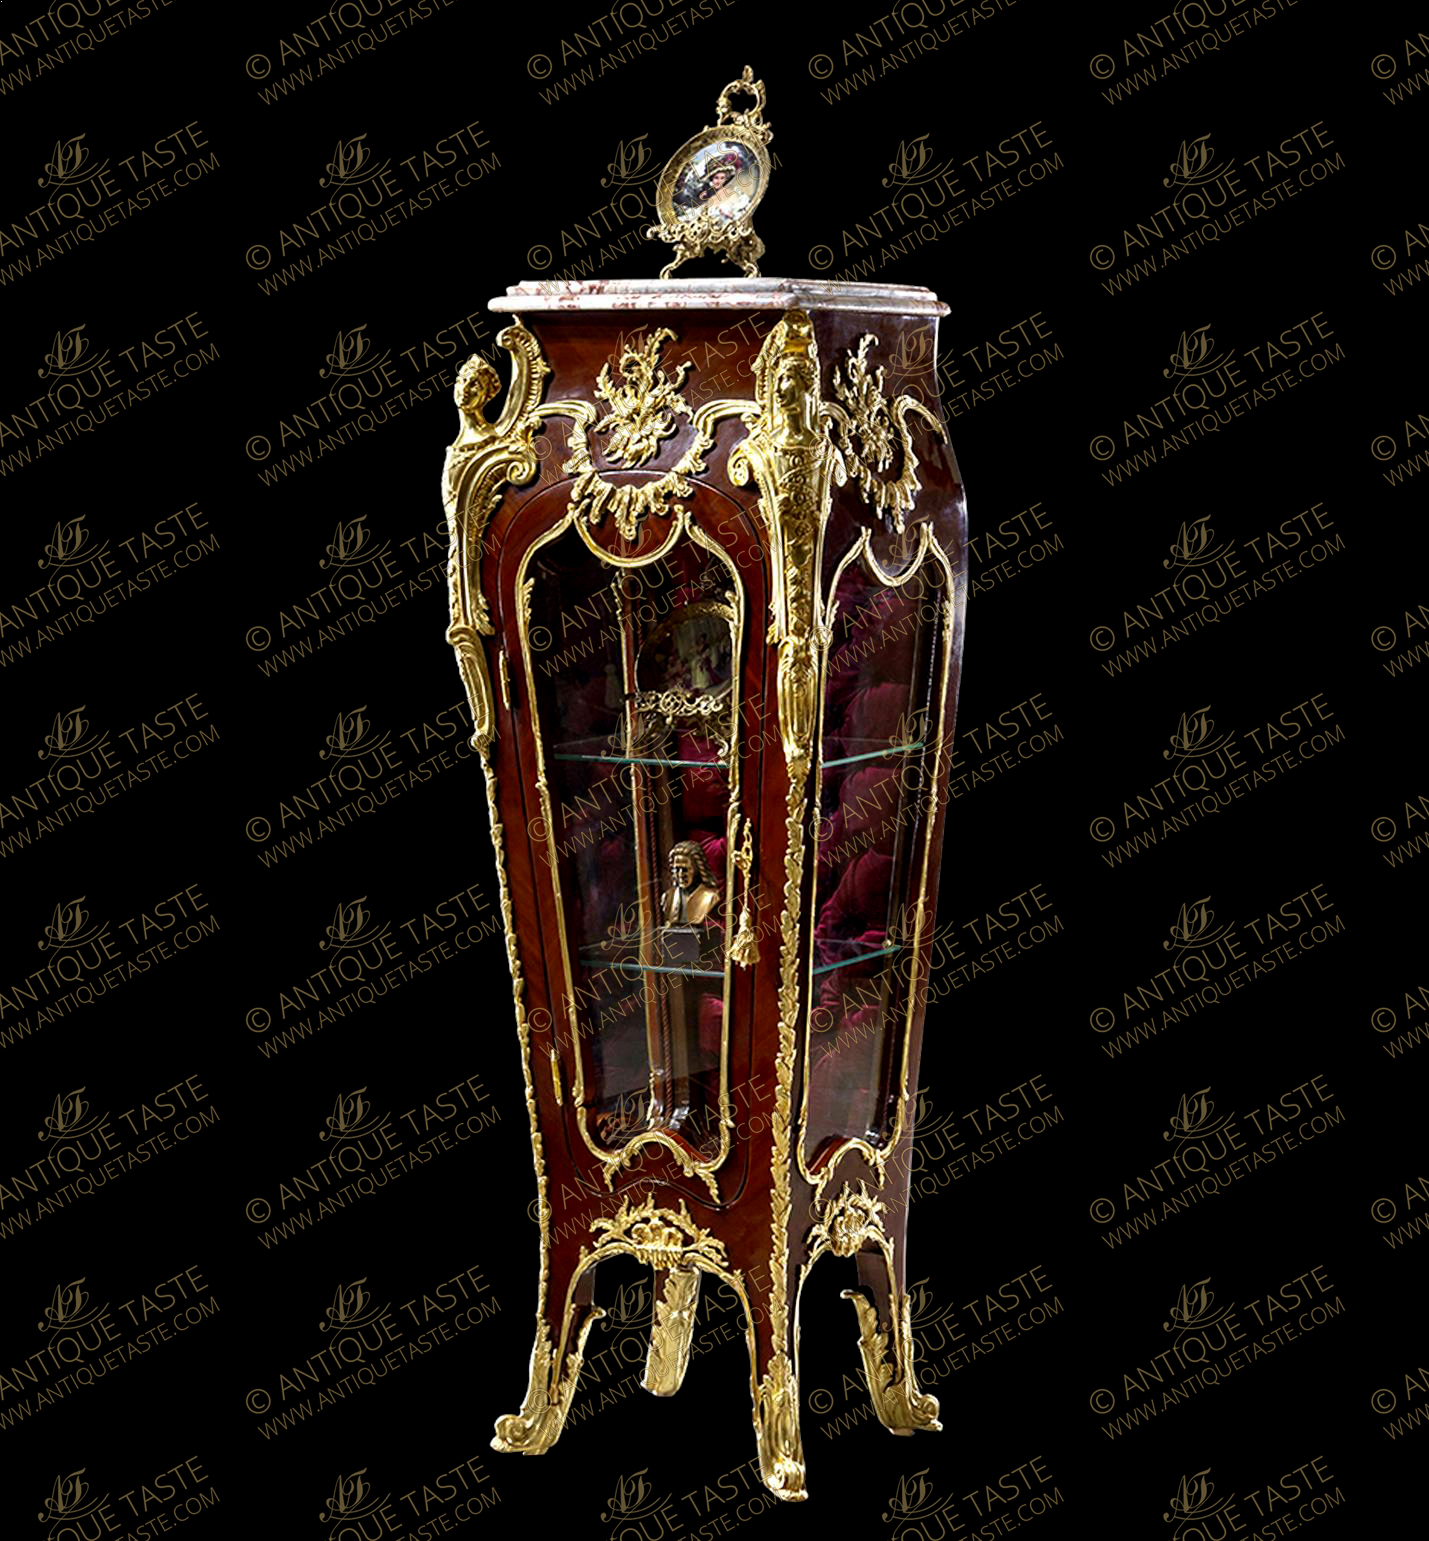 Our elaborate replica of the French Louis xv style gilt-ormolu-mounted veneer inlaid kingwood and mahogany Luxury Vitrine Stand after the model by Francois Linke, Paris, early 20th century; With variegated moulded marble top above tapering sides with three convex molded glazed panels framed with a gilt-ormolu foliate strips below astonishing large gilt-ormolu chute with female espagnolette at each foremost angle with acanthus shell scrolls and C works, elongated with fine leafy trim to the legs and connected with suspending festooned foliate shell mounts, with one door houses two glass shelves having velvet capitoné upholstered back and ormolu foliate keyhole escutcheon, stands on tapering legs and terminating in wrap around scrolled acanthus sabots. The curved bottom contour with foliate ormolu filet and mounted with richly chiseled foliate and waterfalls ormolu mount. EXCEPTIONAL PIECE OF ART.